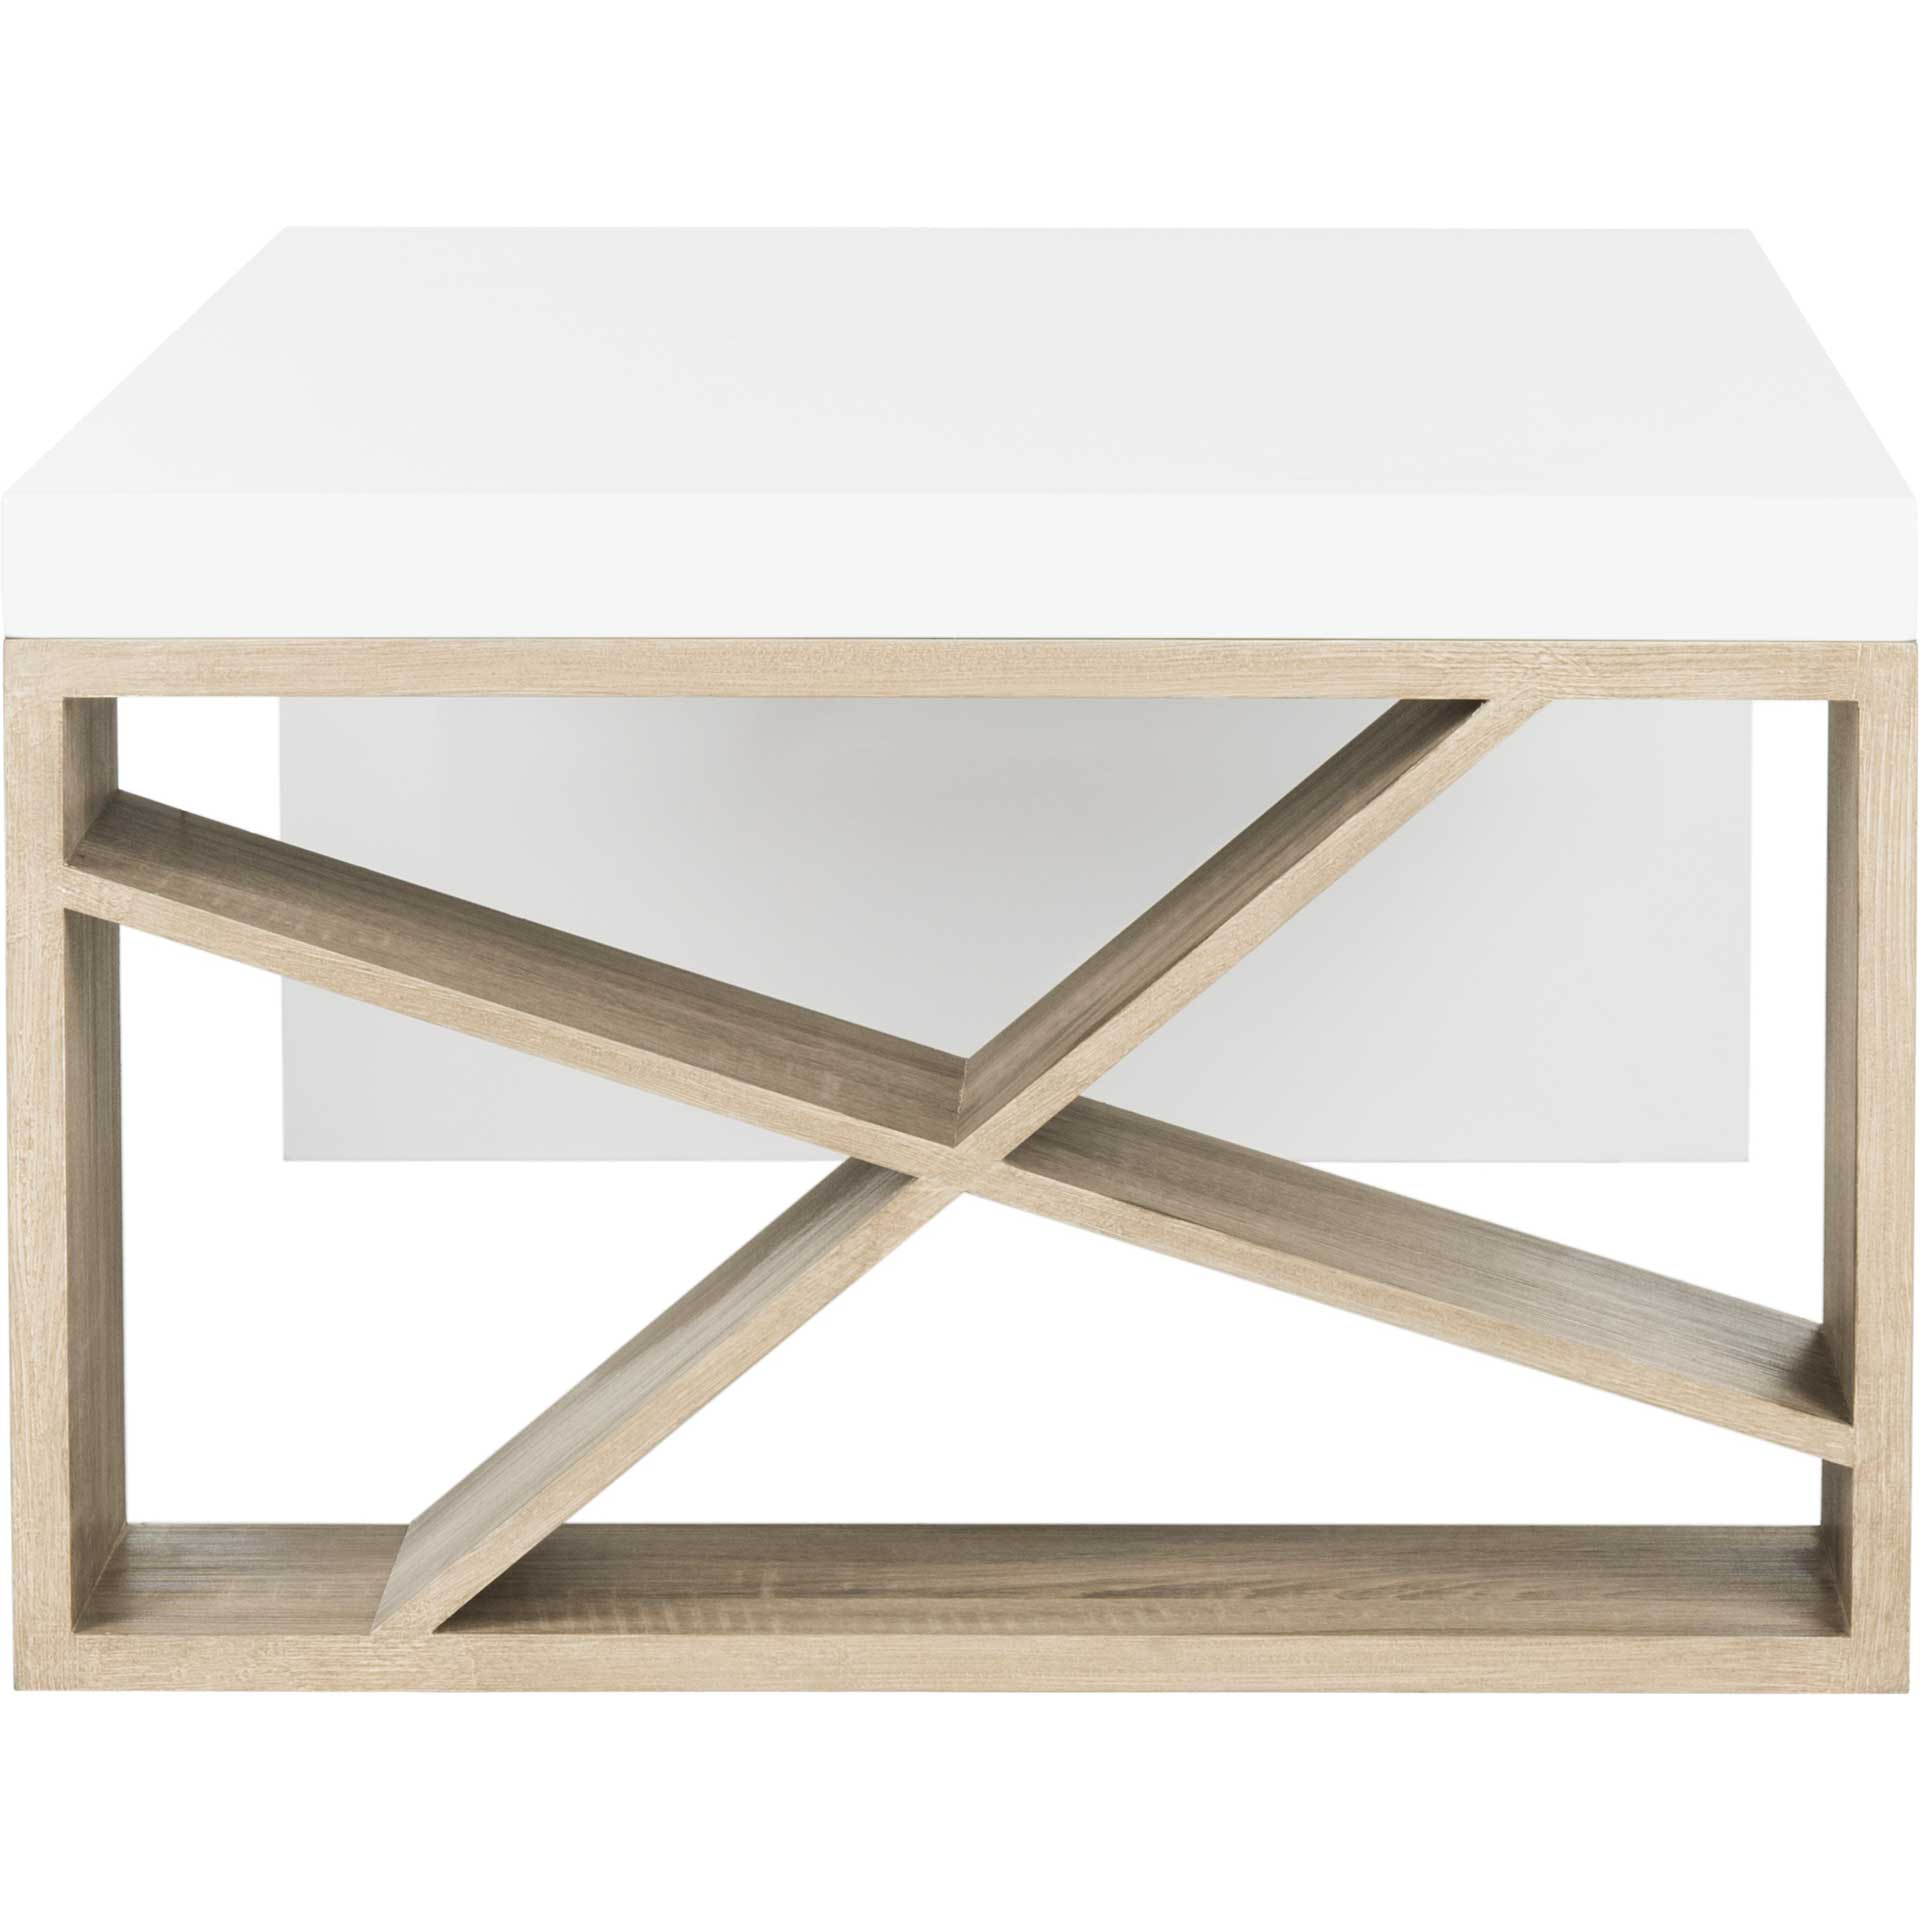 Canning Lacquer Coffee Table White/Light Oak